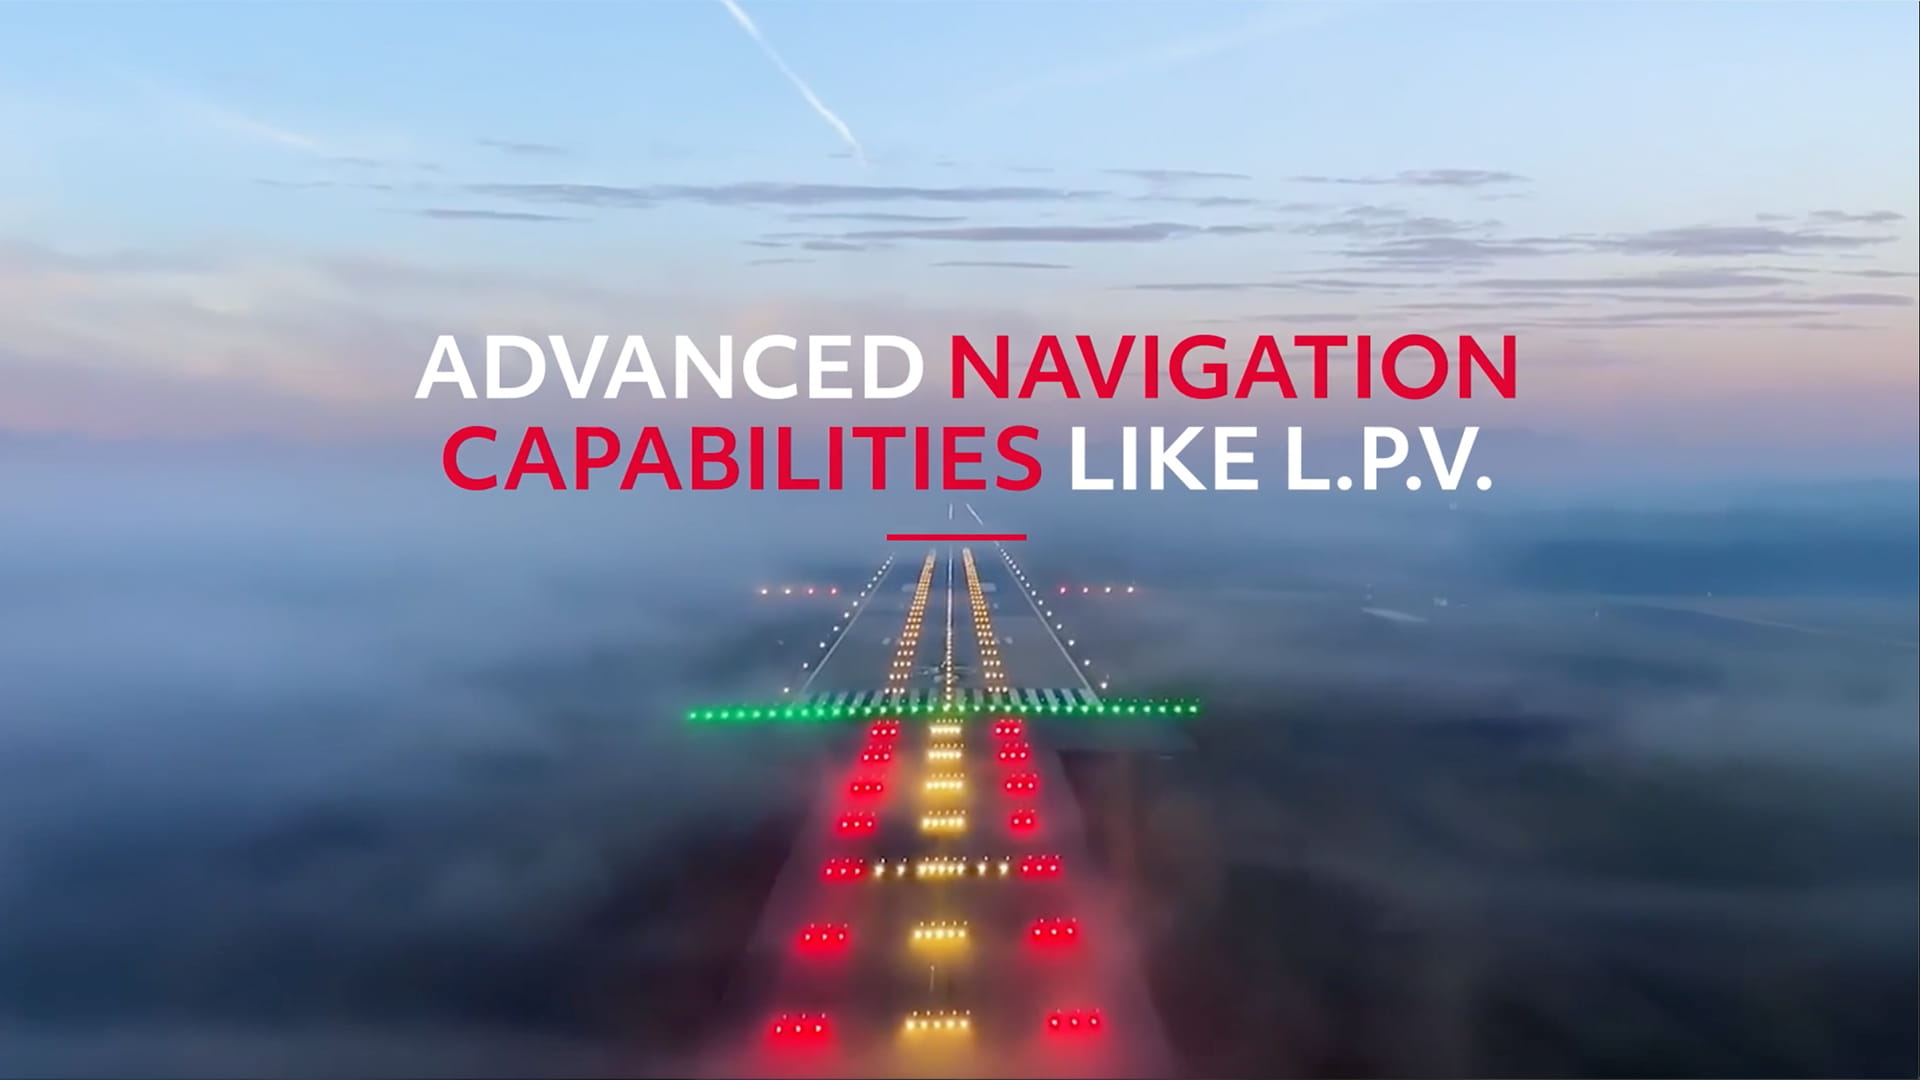 An airport runway seen through a thick layer of fog. A caption reads 'Advanced Navigation Capabilities like L.P.V."